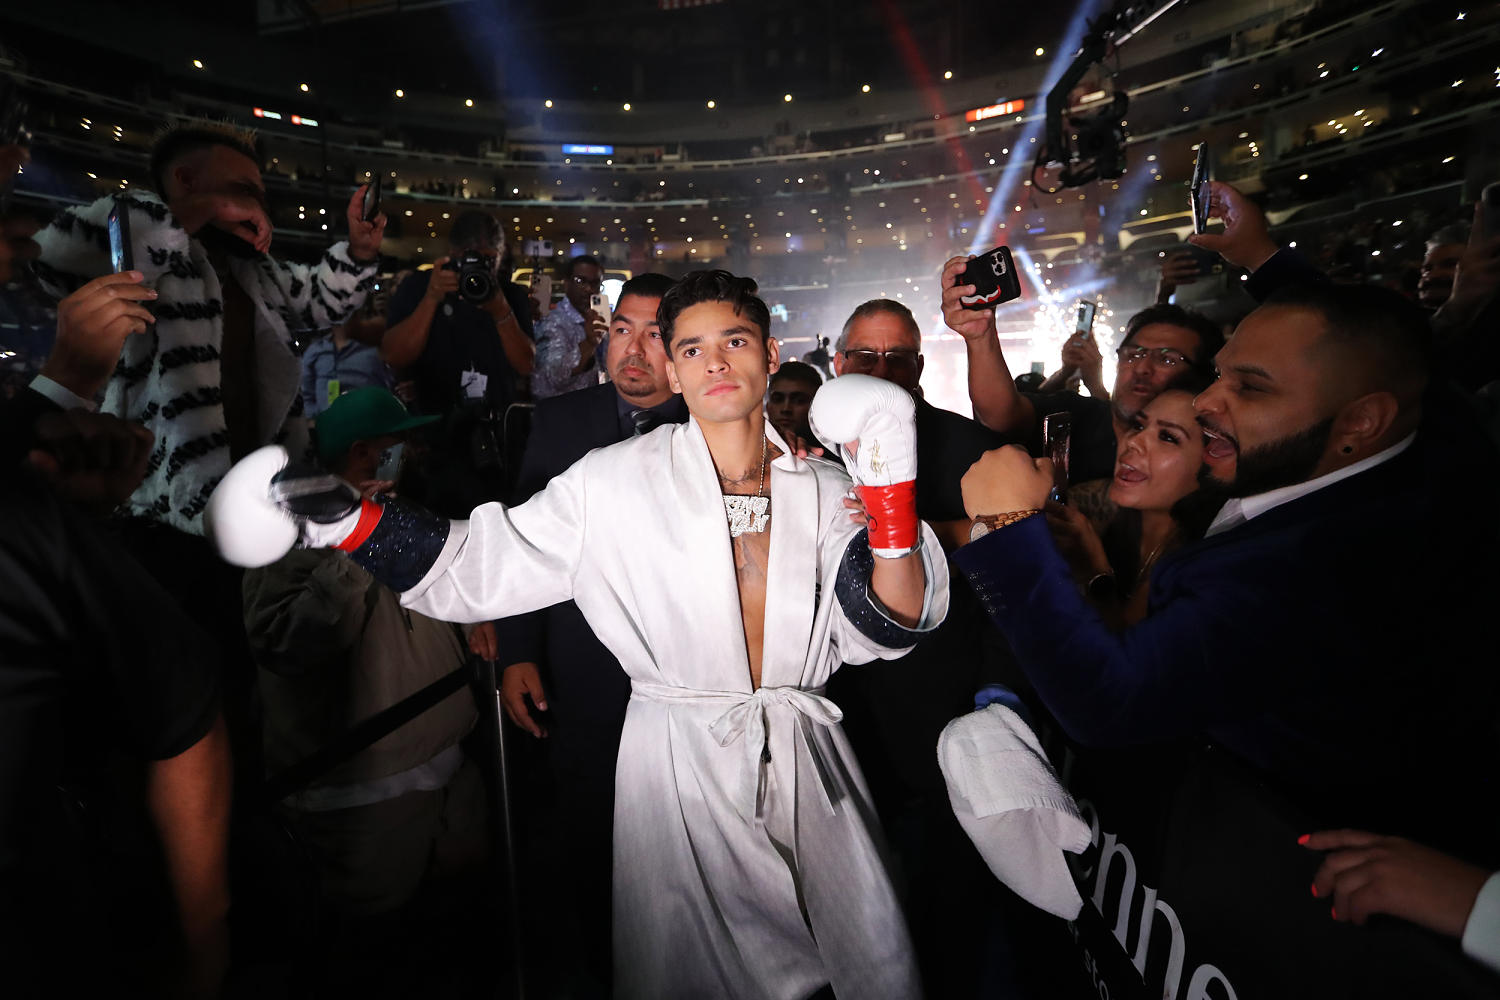 Trump-loving boxer Ryan Garcia expelled by boxing organization after online racist tirade